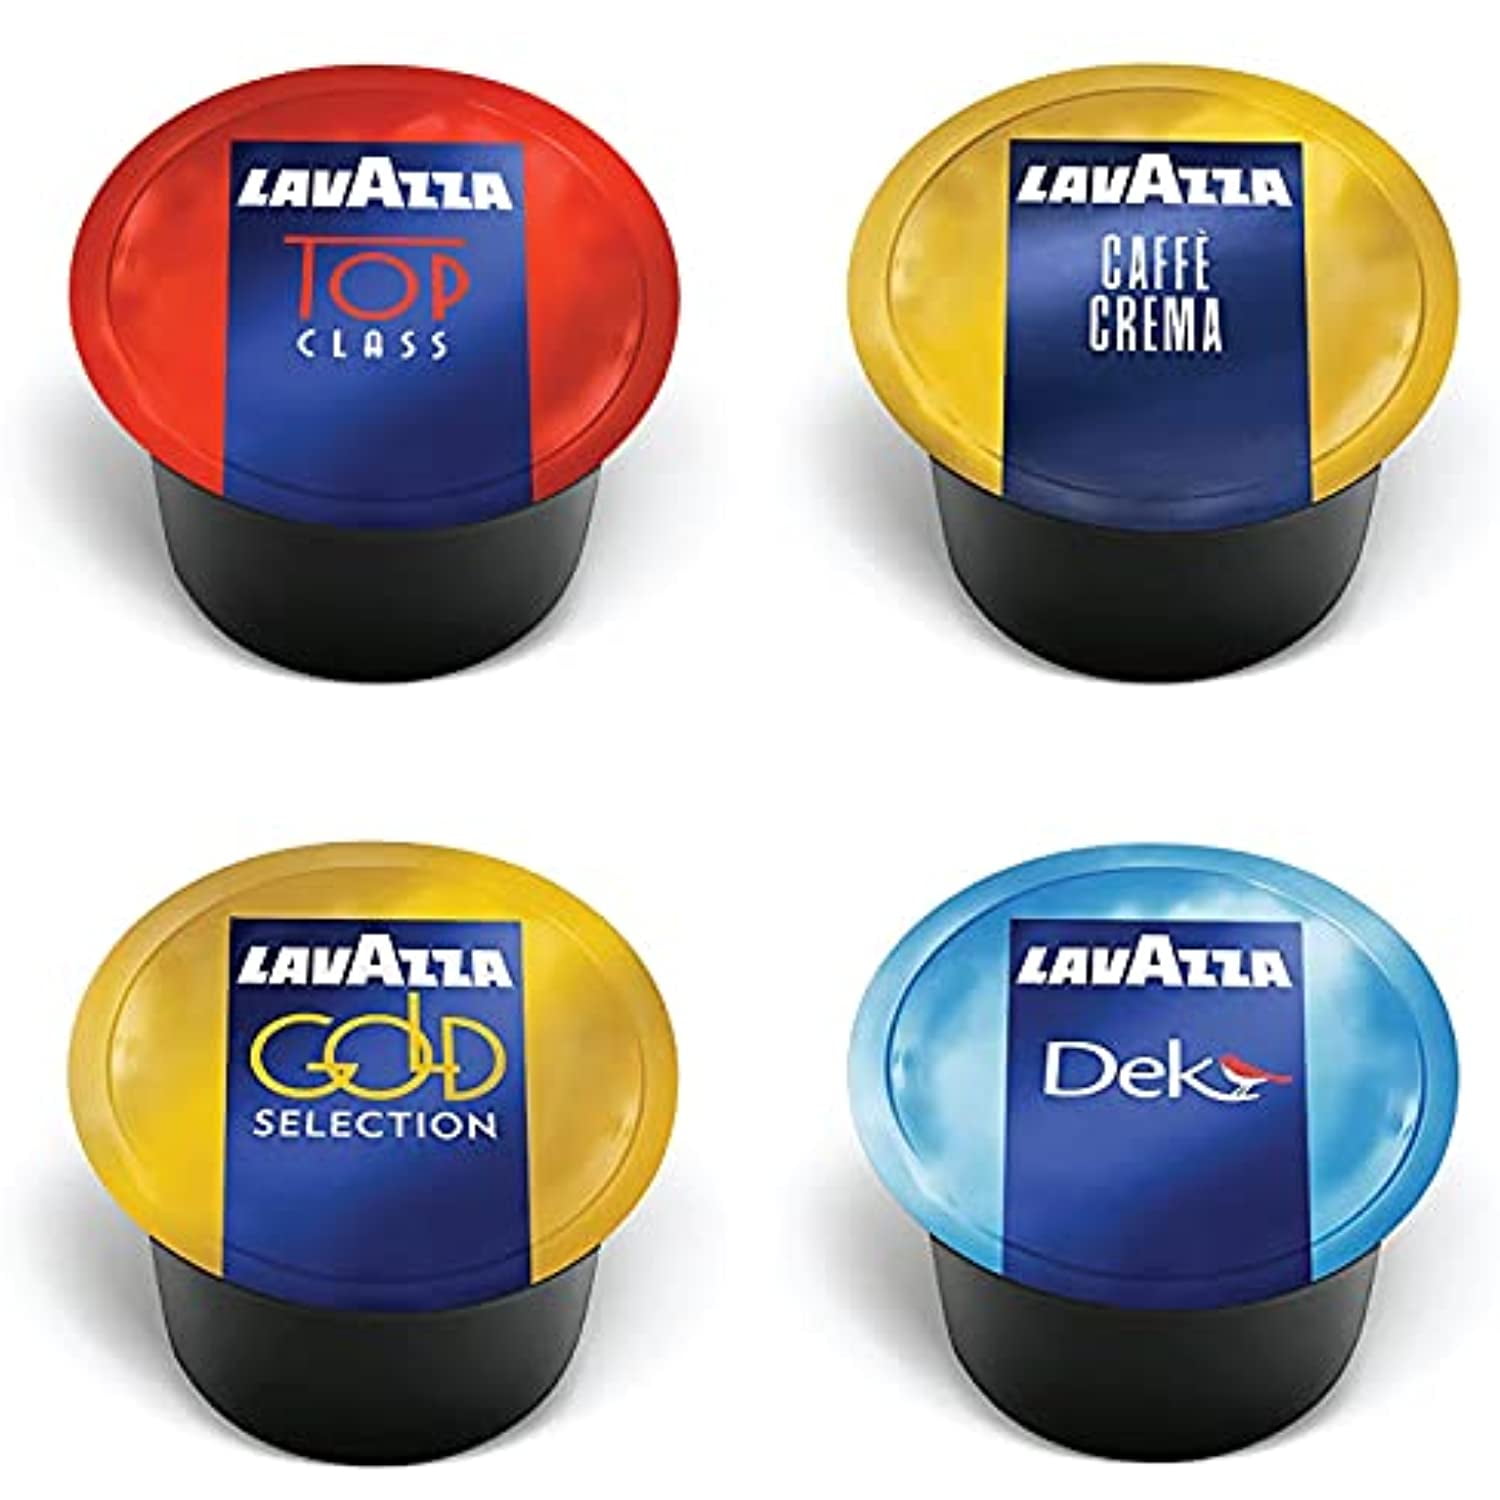  Lavazza Blue Capsules Coffee Pods, Best Value Pack, 100 ct,  All Flavors - Top Class, Caffe Crema, Decaf, Gran Espresso, Gold - 20each :  Everything Else